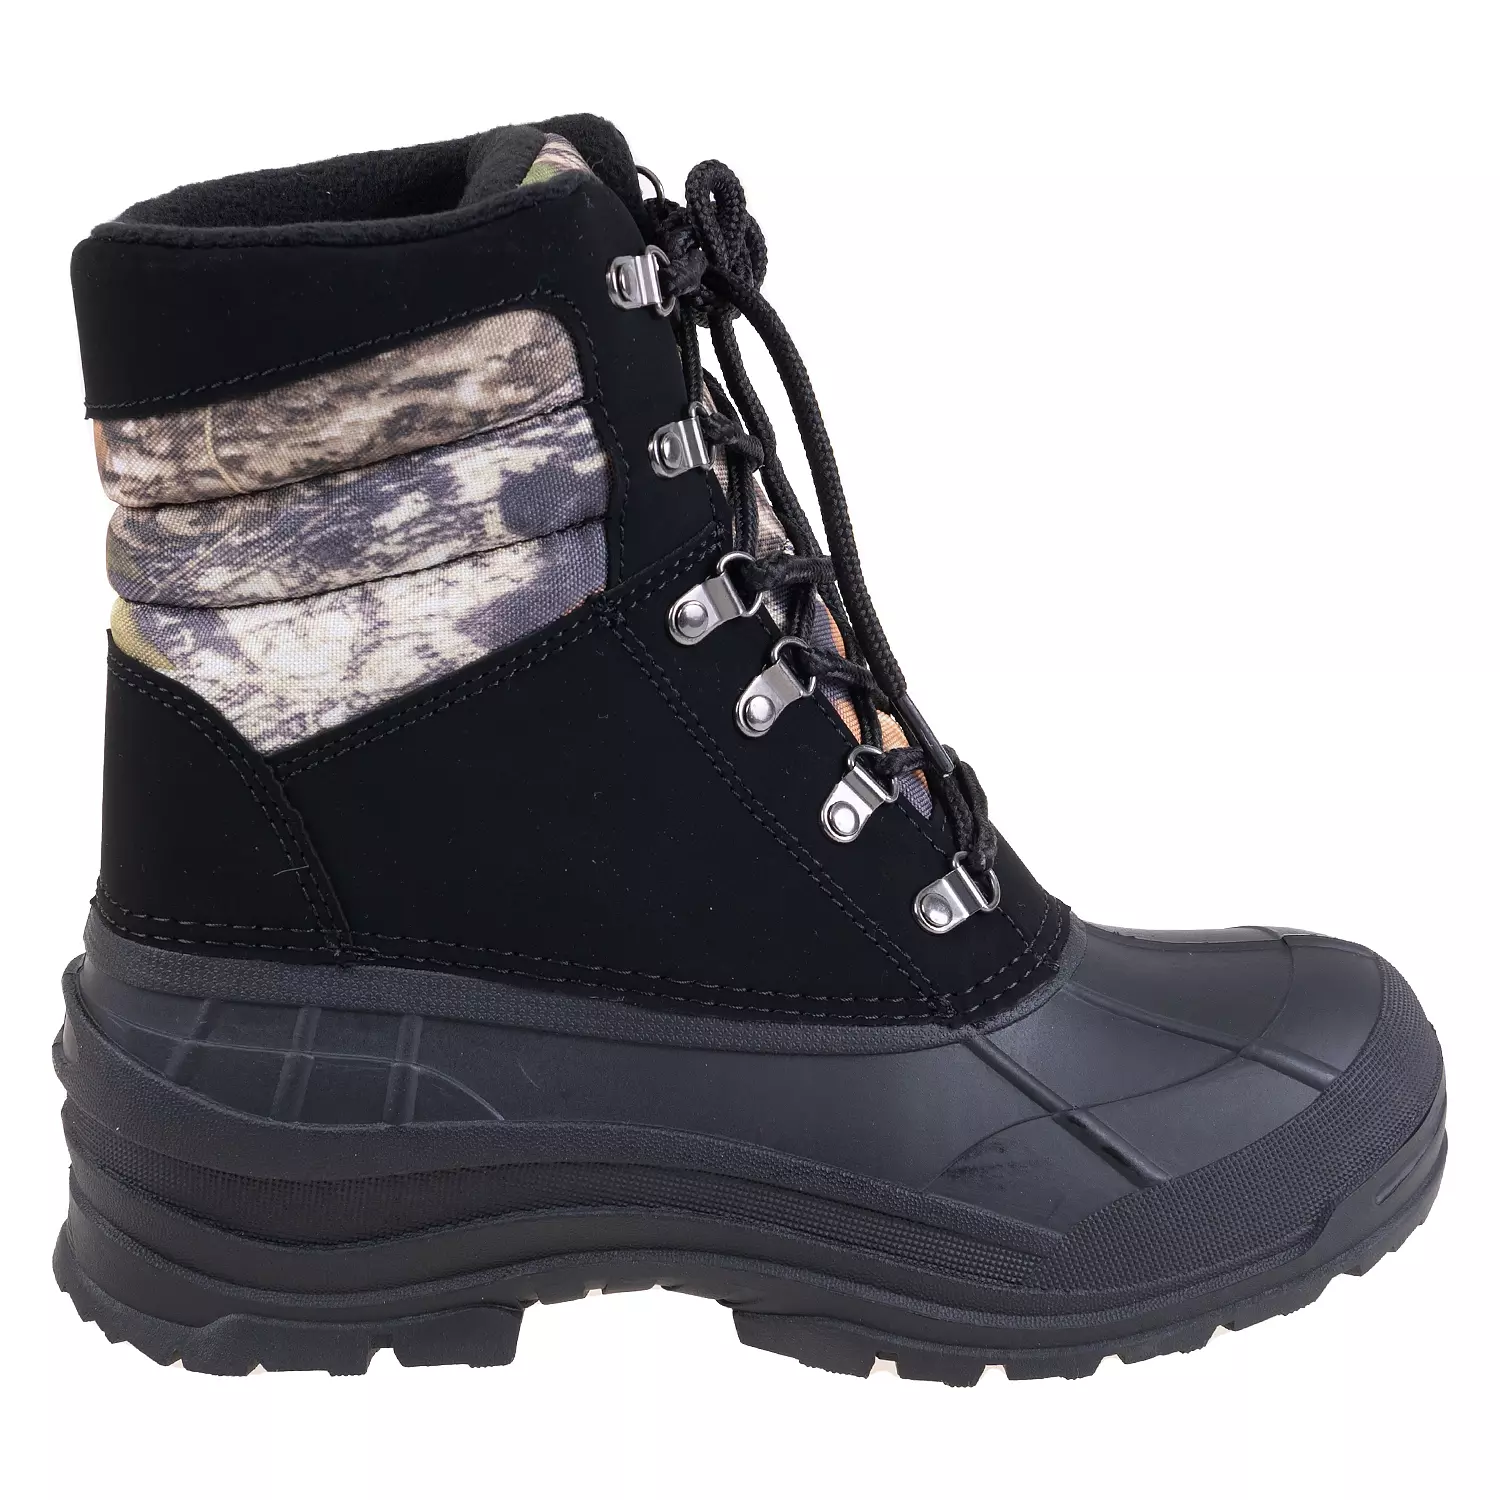 Men's waterproof winter boots with camouflage details, size 12